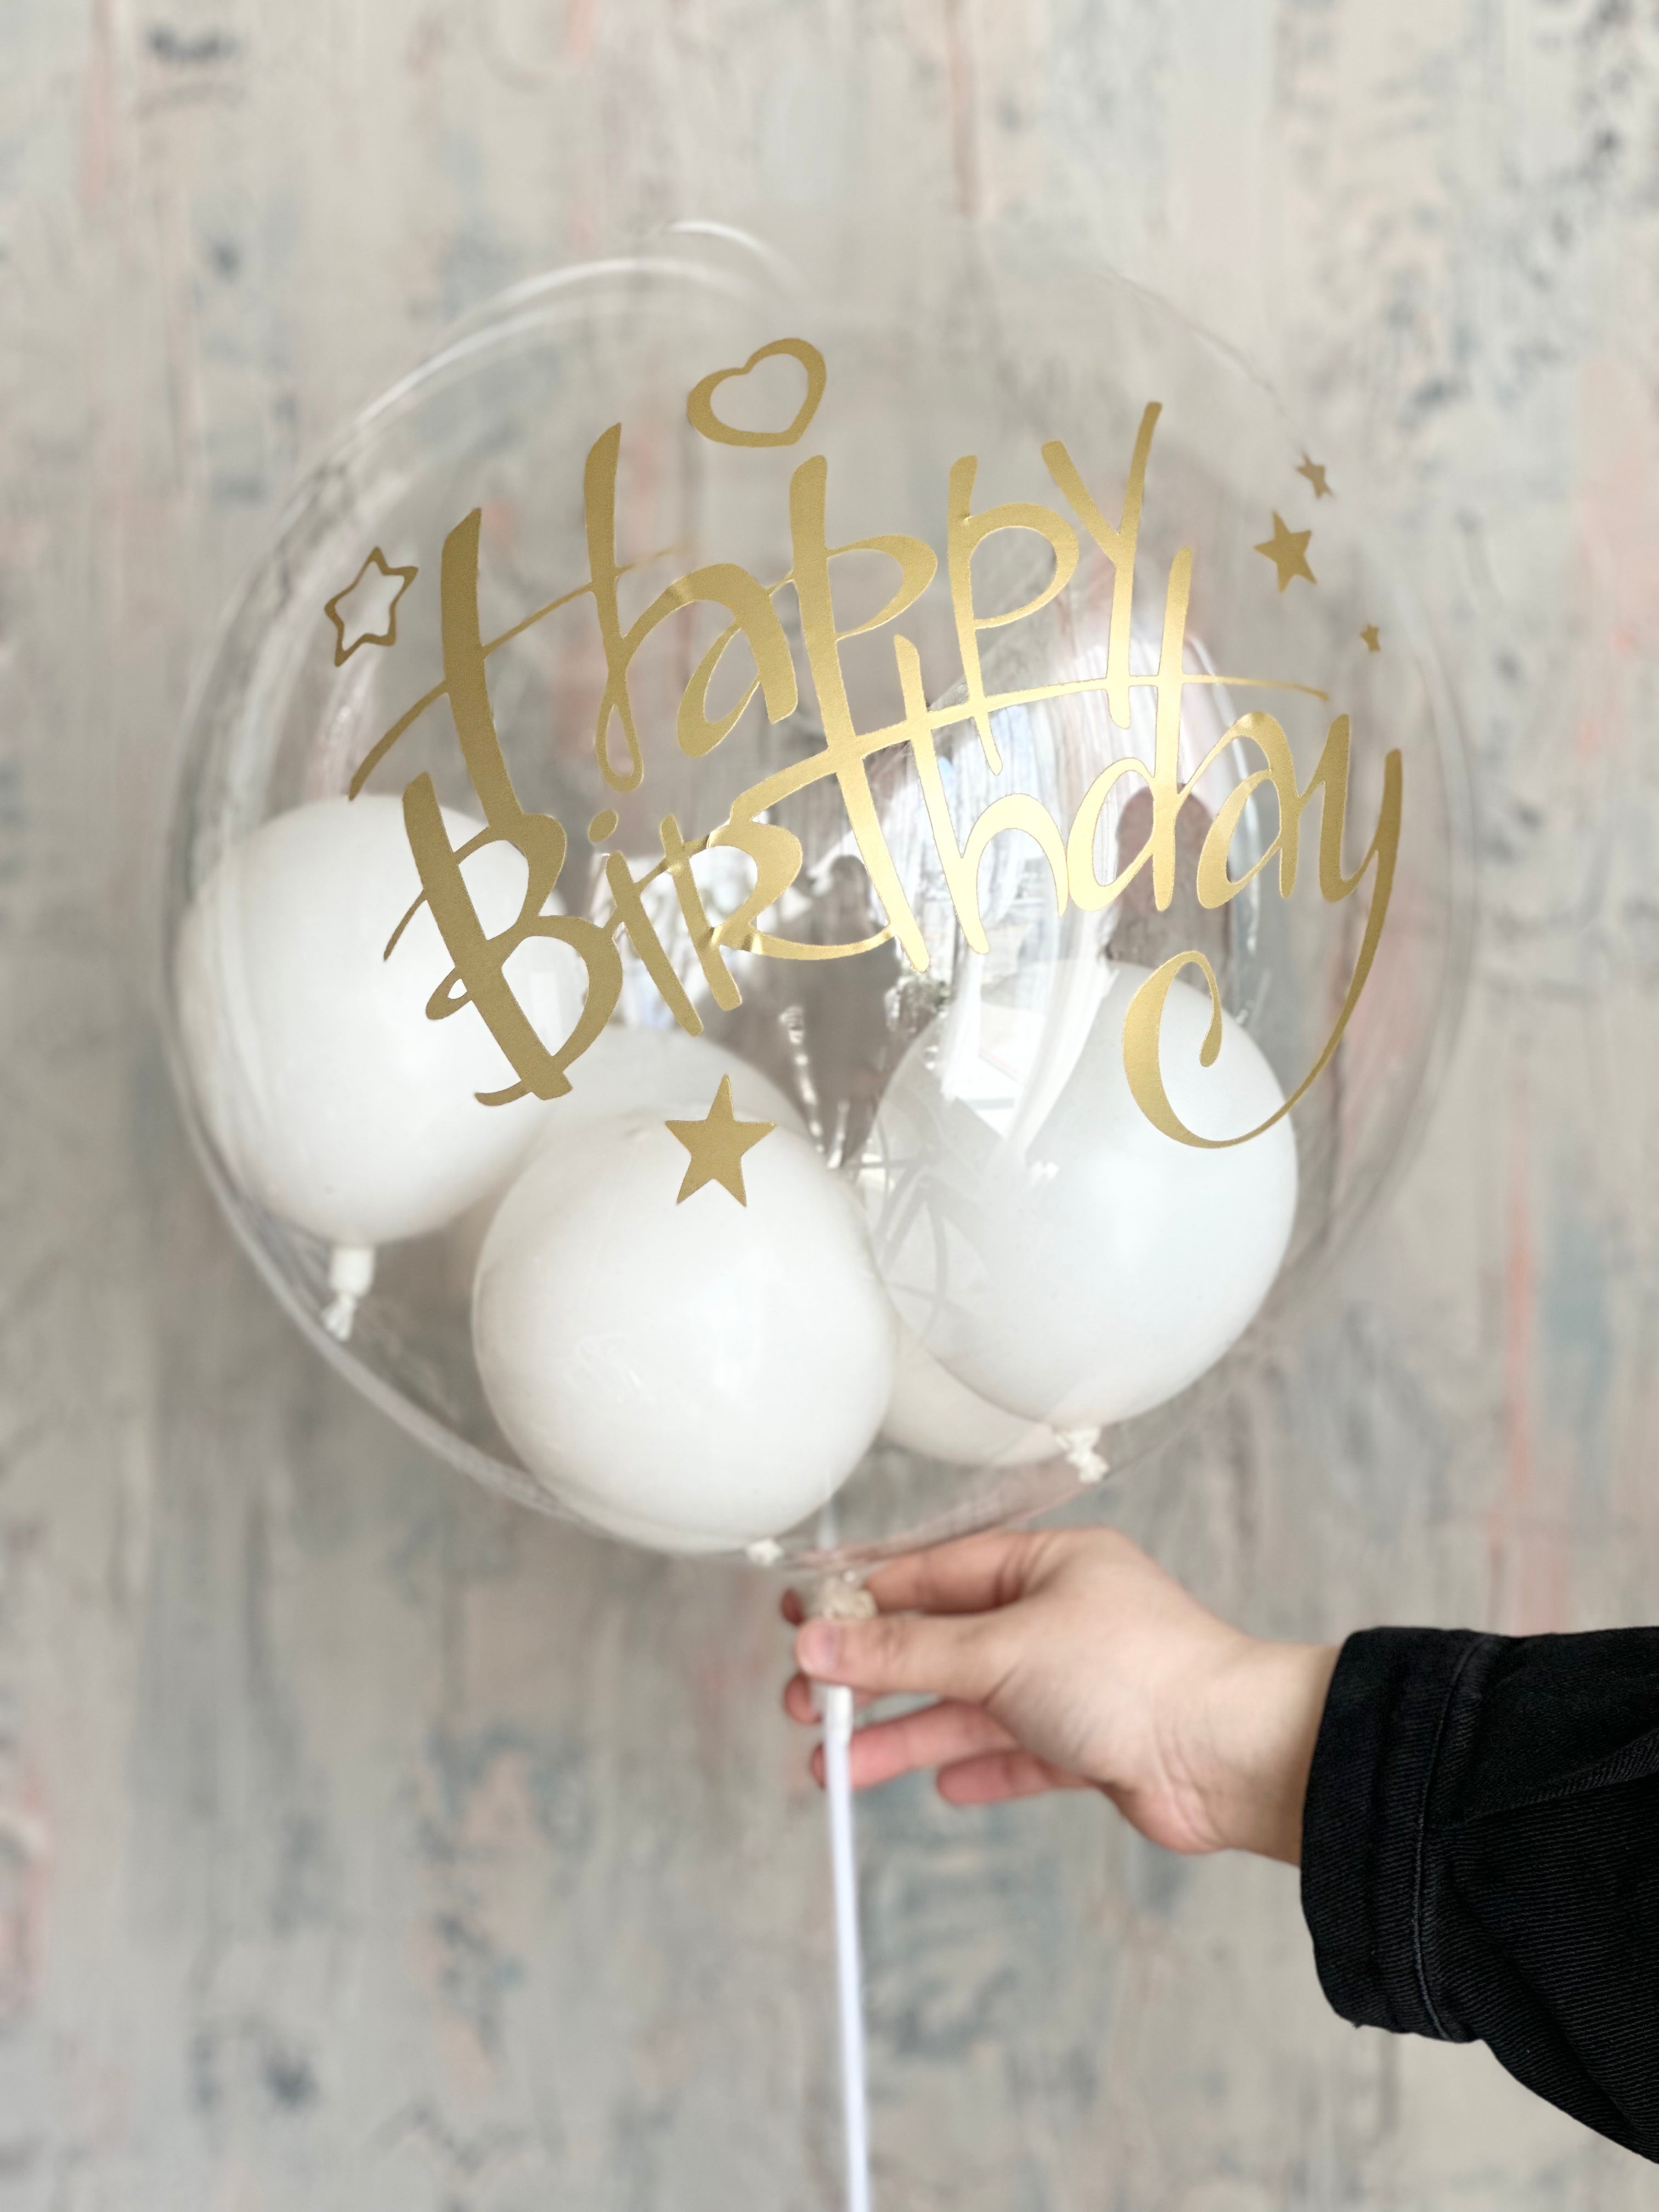 Mix of Chocolates & Flowers with a Bubble Balloon - La Fleur